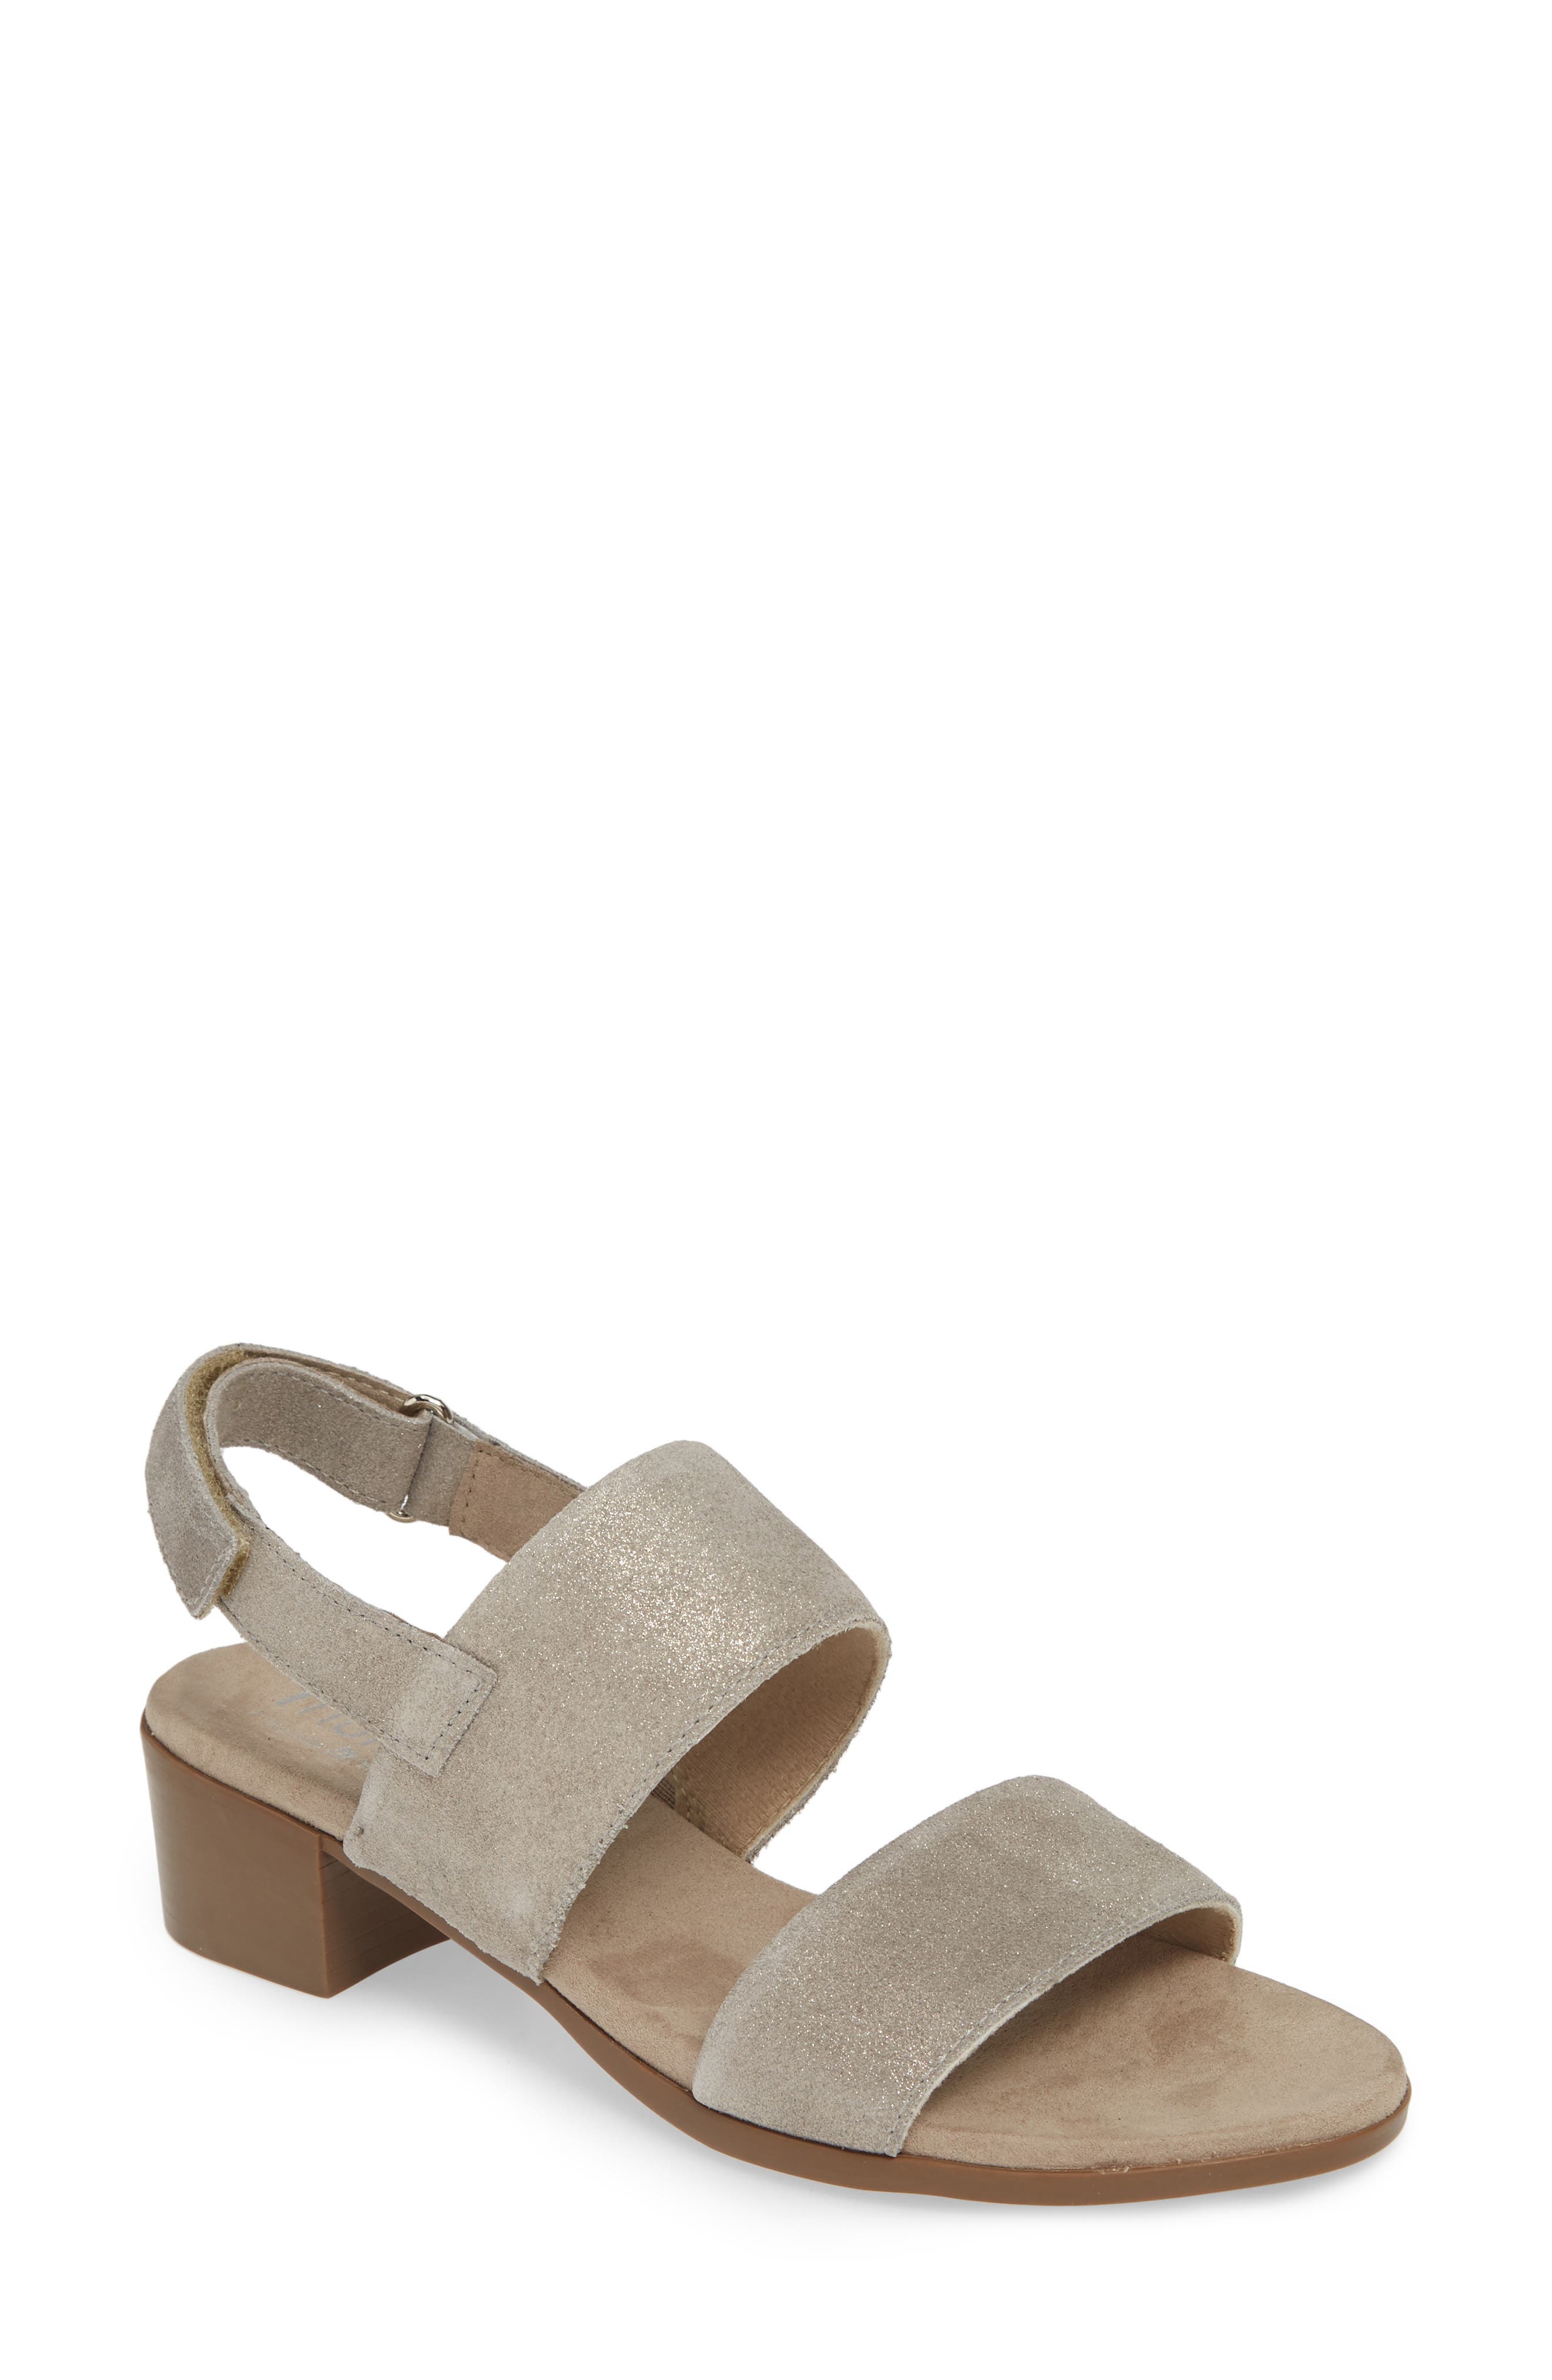 Women's Munro Shoes | Nordstrom